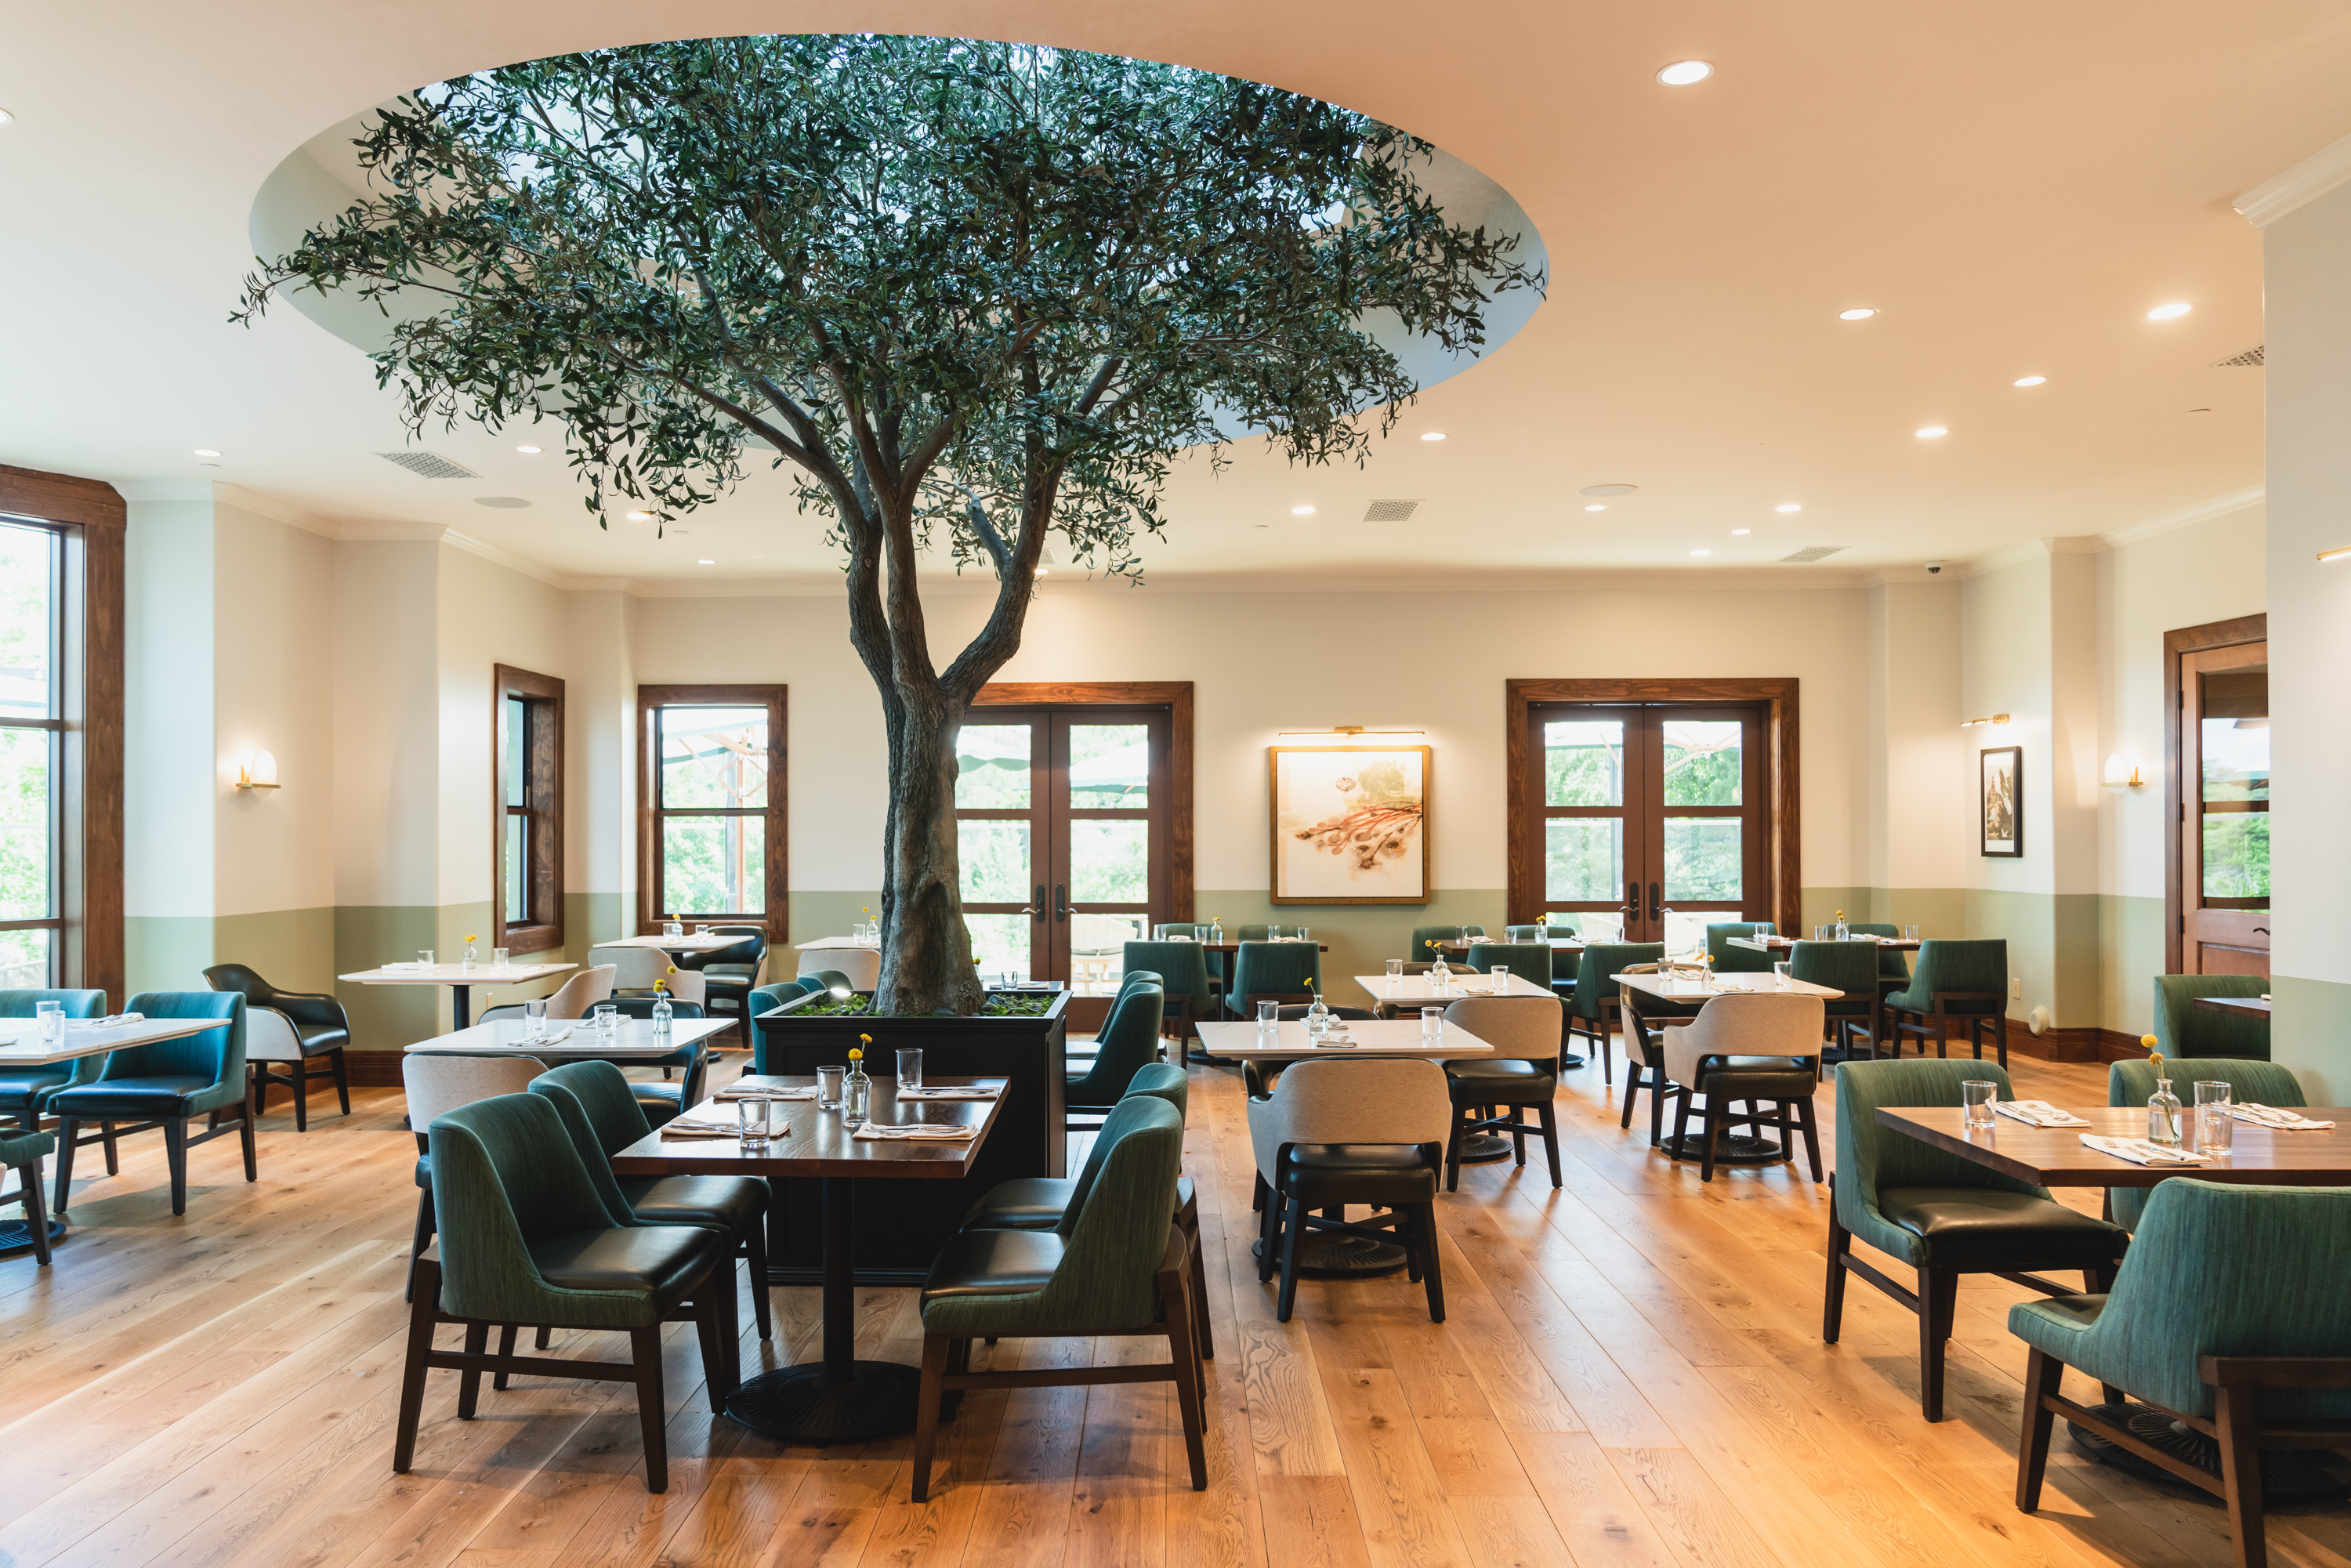 A restaurant dining room with a tree in the middle.